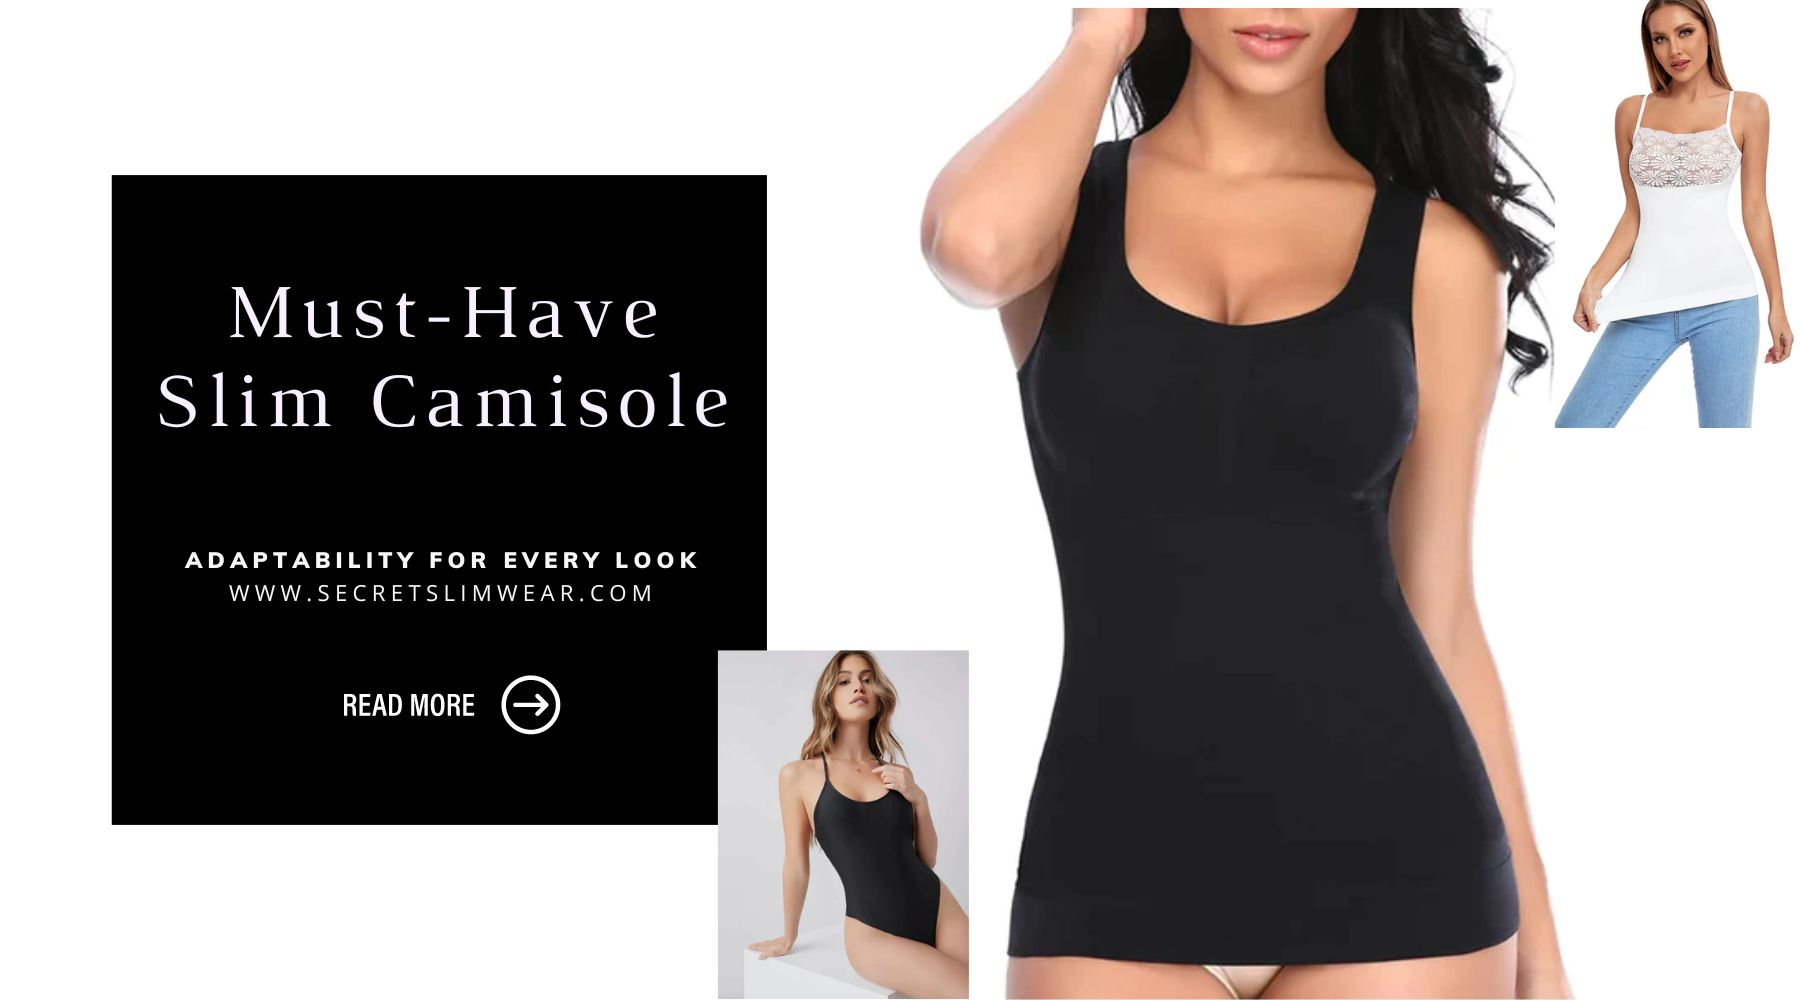 Why Every Woman Needs a Secret Slim Wear Camisole in Her Wardrobe